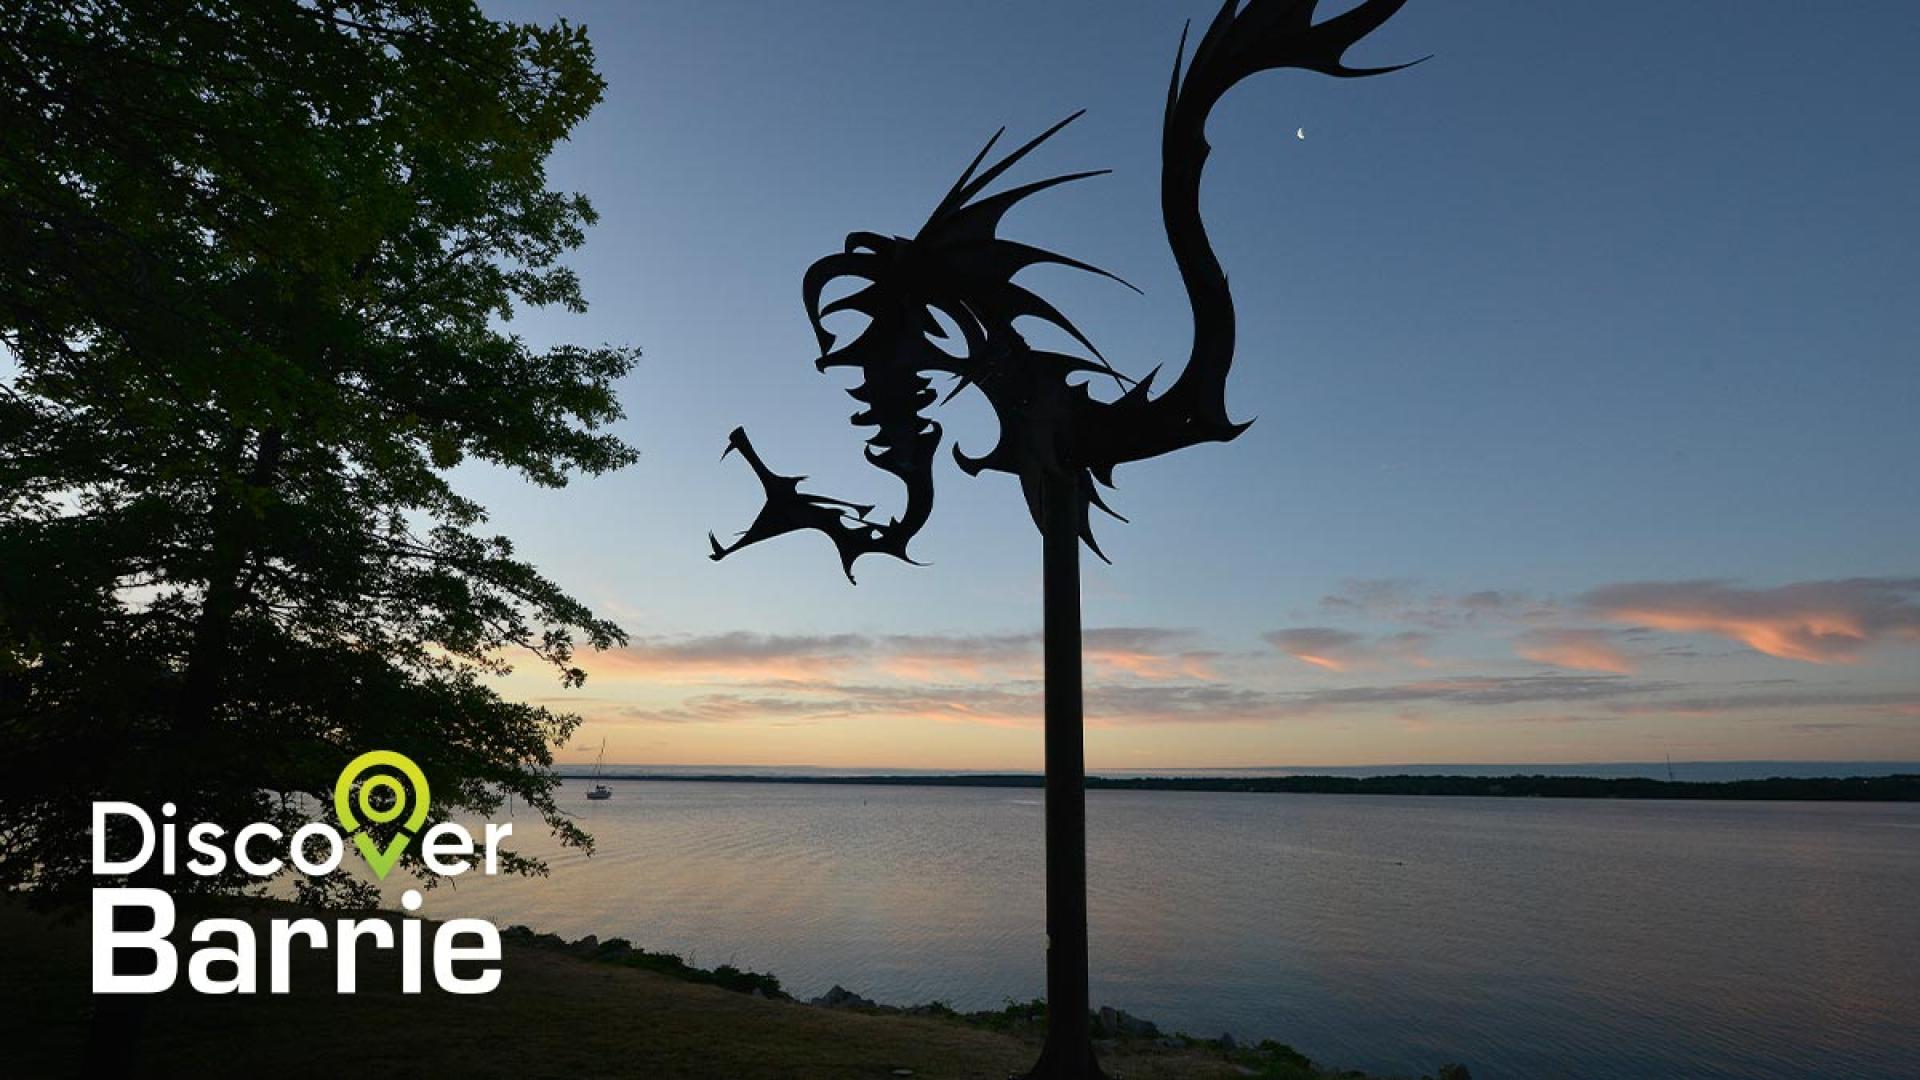 Discover Barrie logo over photo of Sea Serpent public art piece